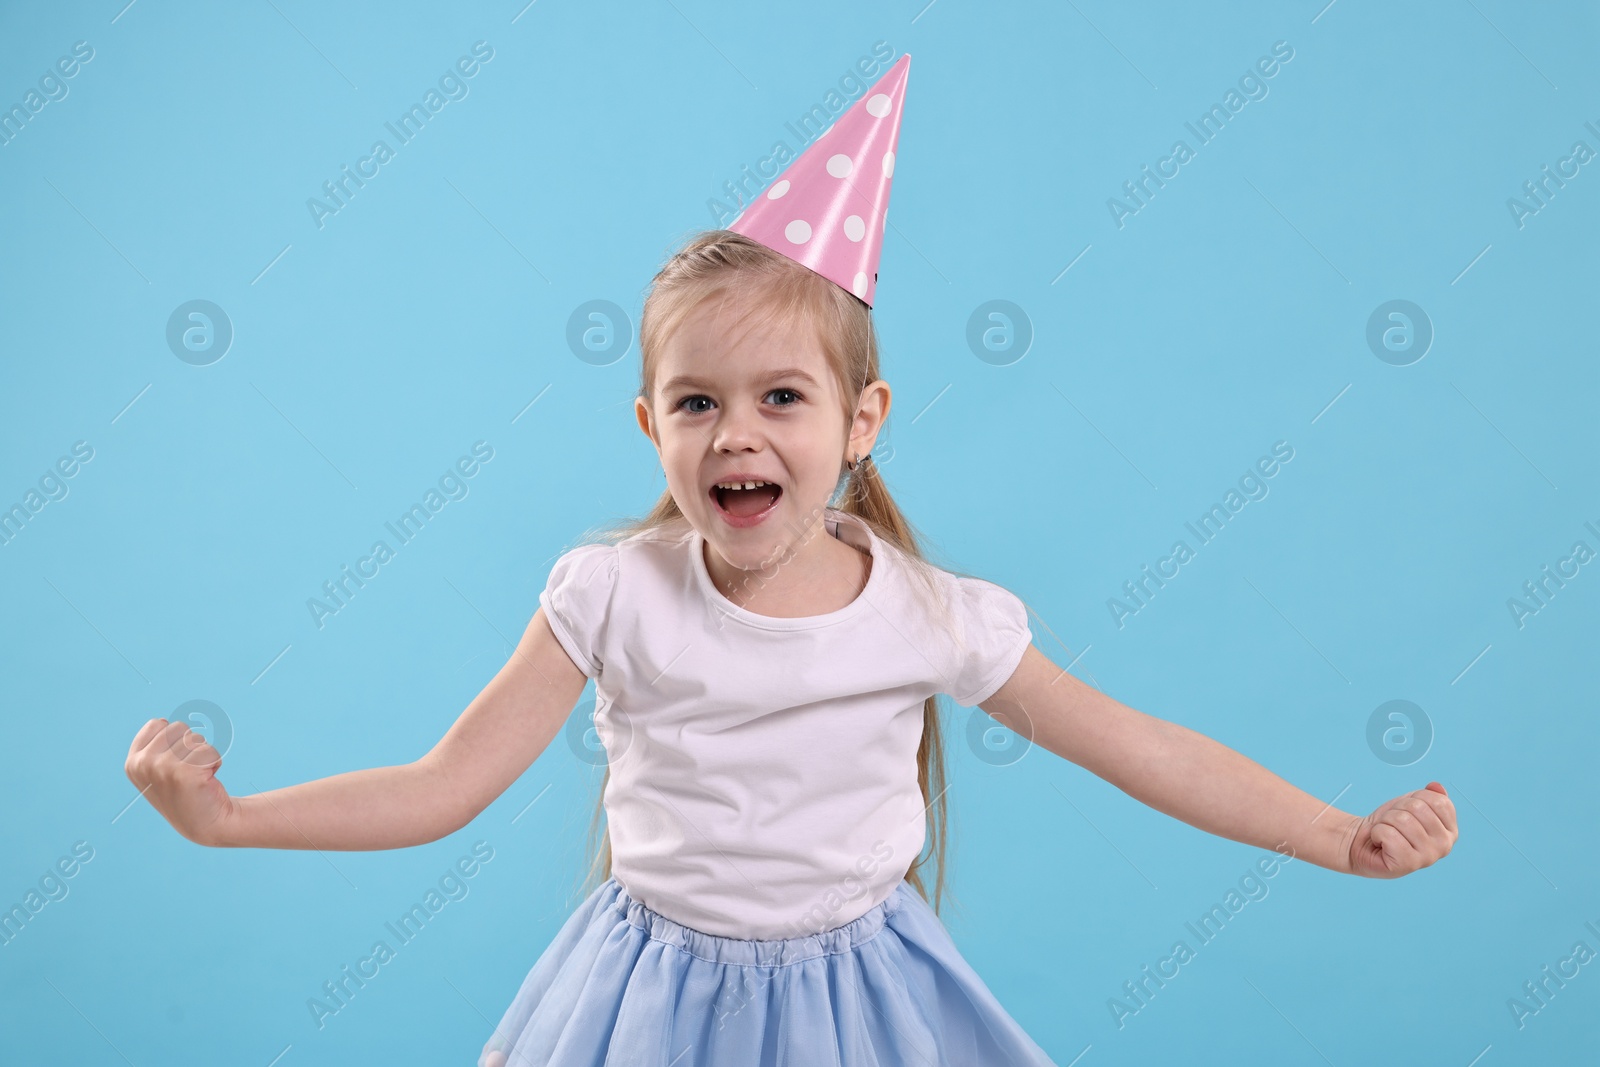 Photo of Birthday celebration. Cute little girl in party hat on light blue background